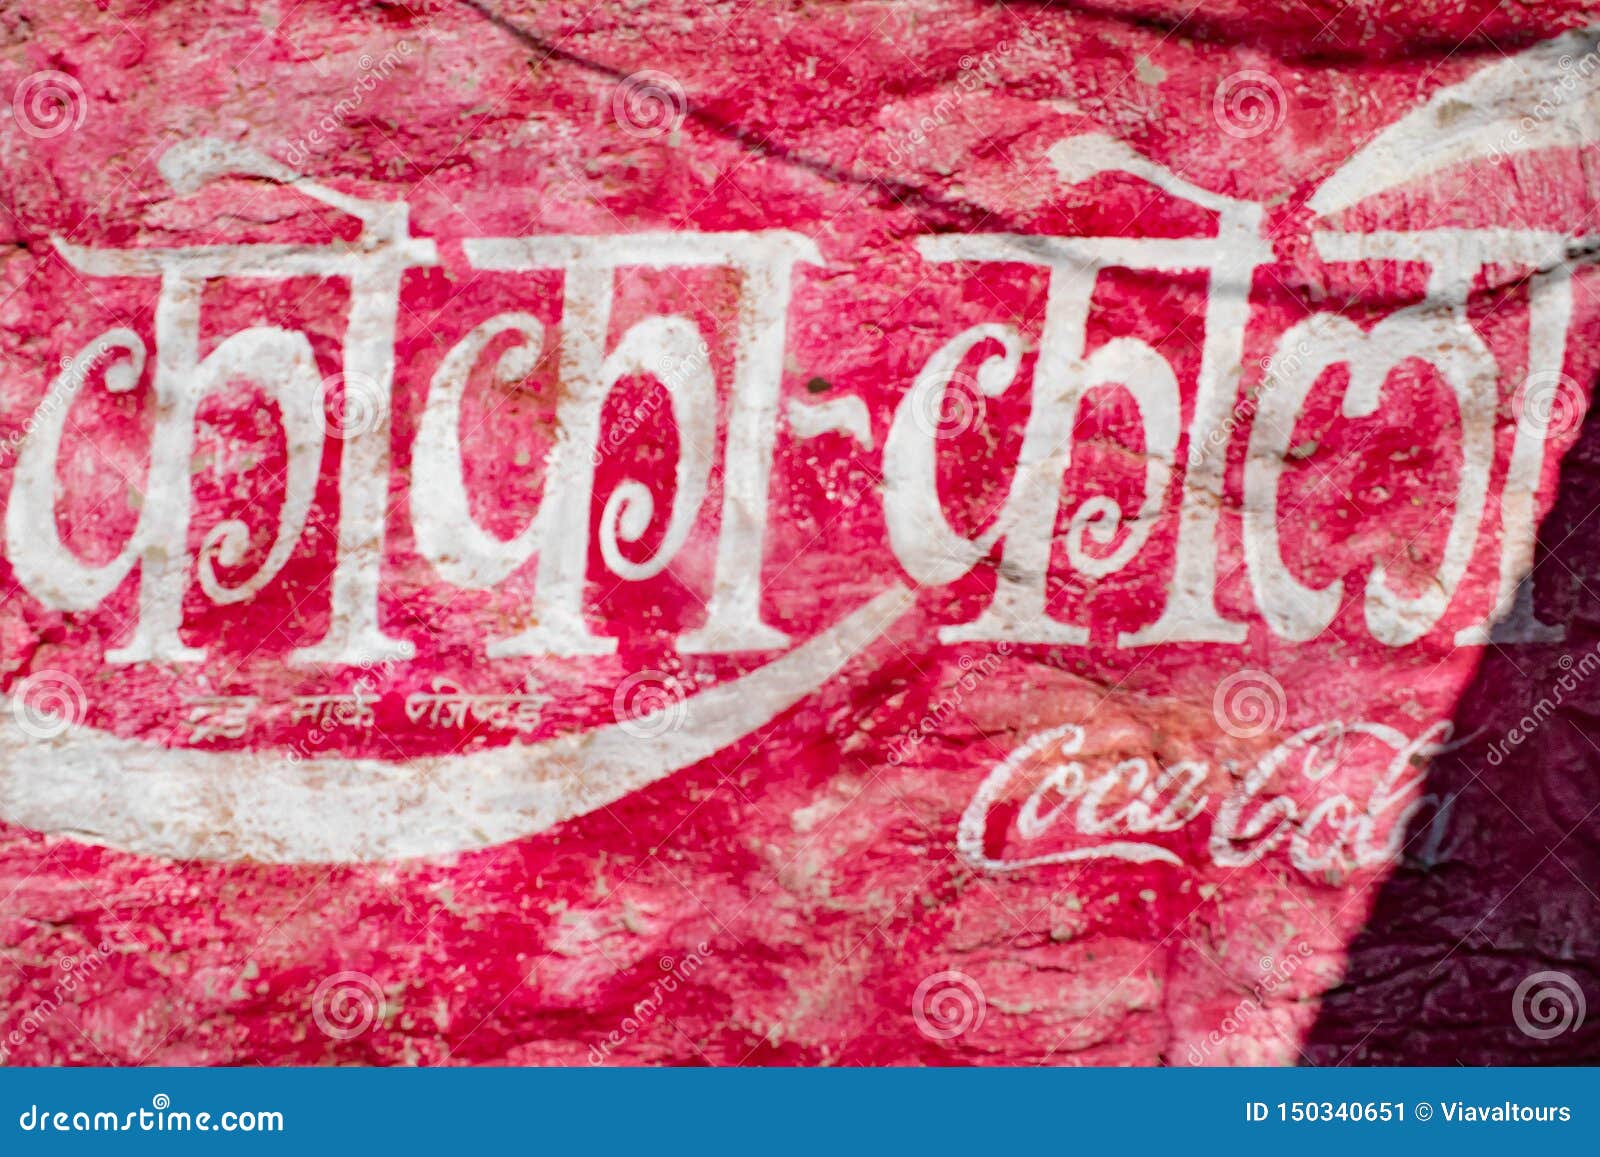 Asian Poster of Coca Cola in Animal Kingdom at Walt Disney World .  Editorial Photo - Image of everest, animals: 150340651